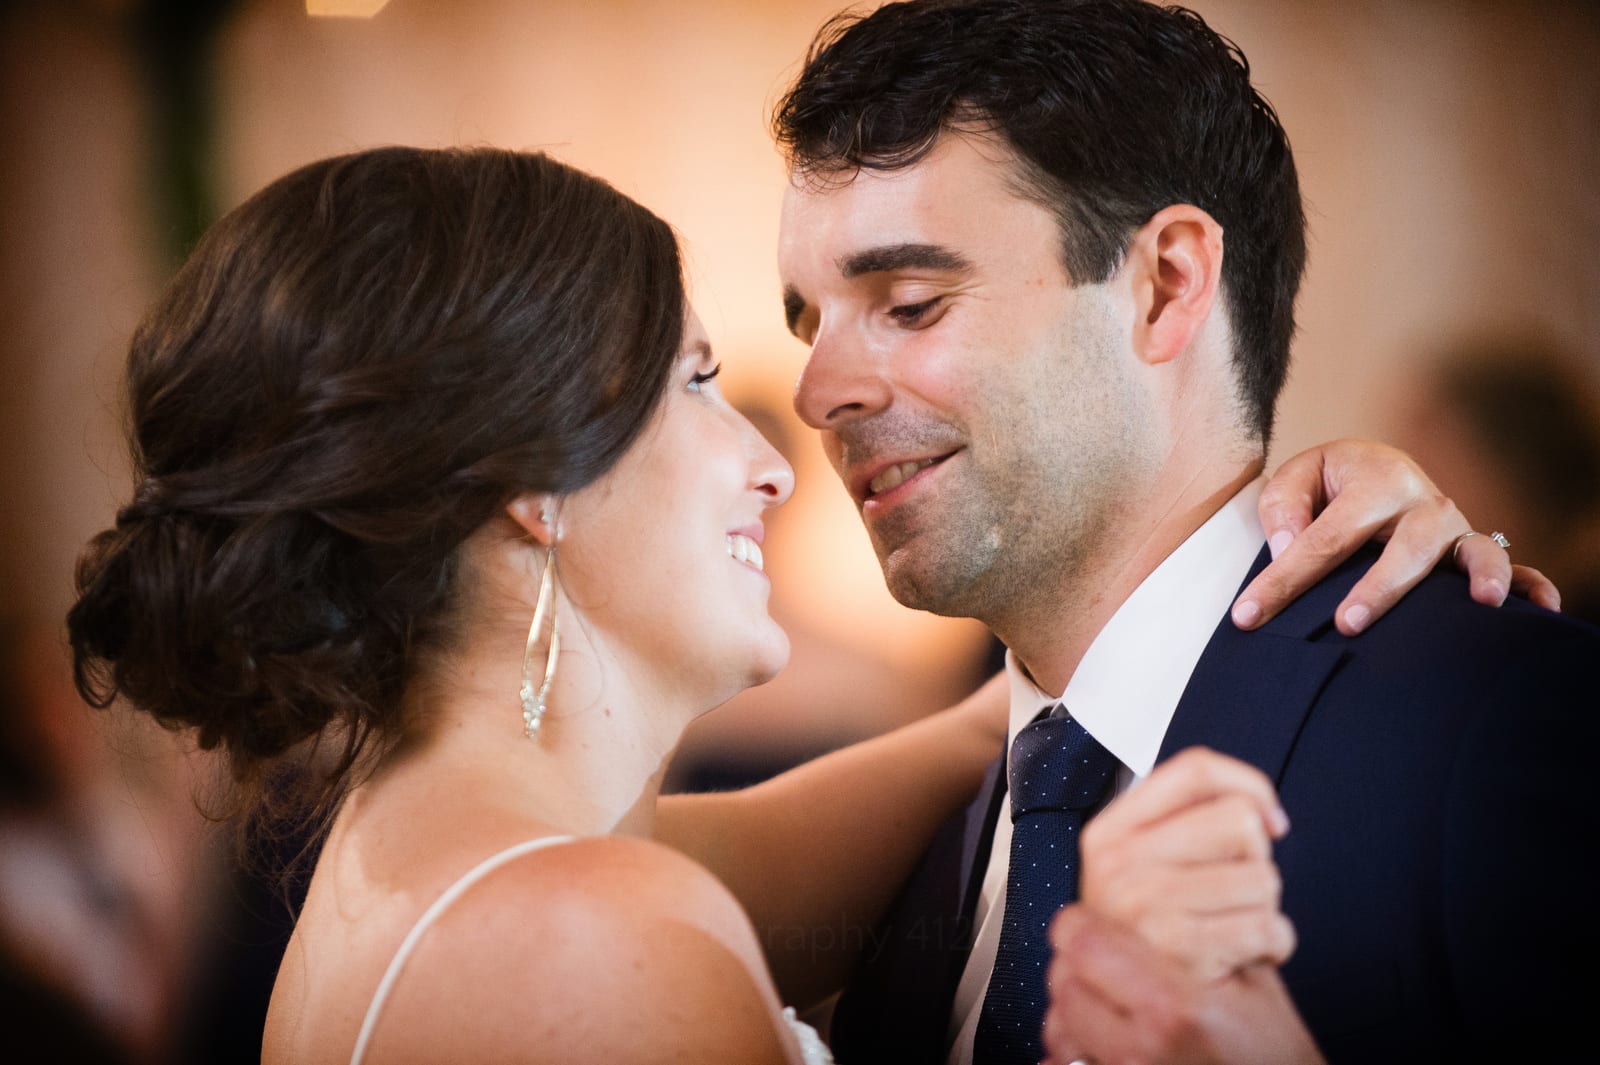 A closeup of a bride and groom smiling at each other while they're dancing Wedding Photography at Fairmont Hotel Pittsburgh.